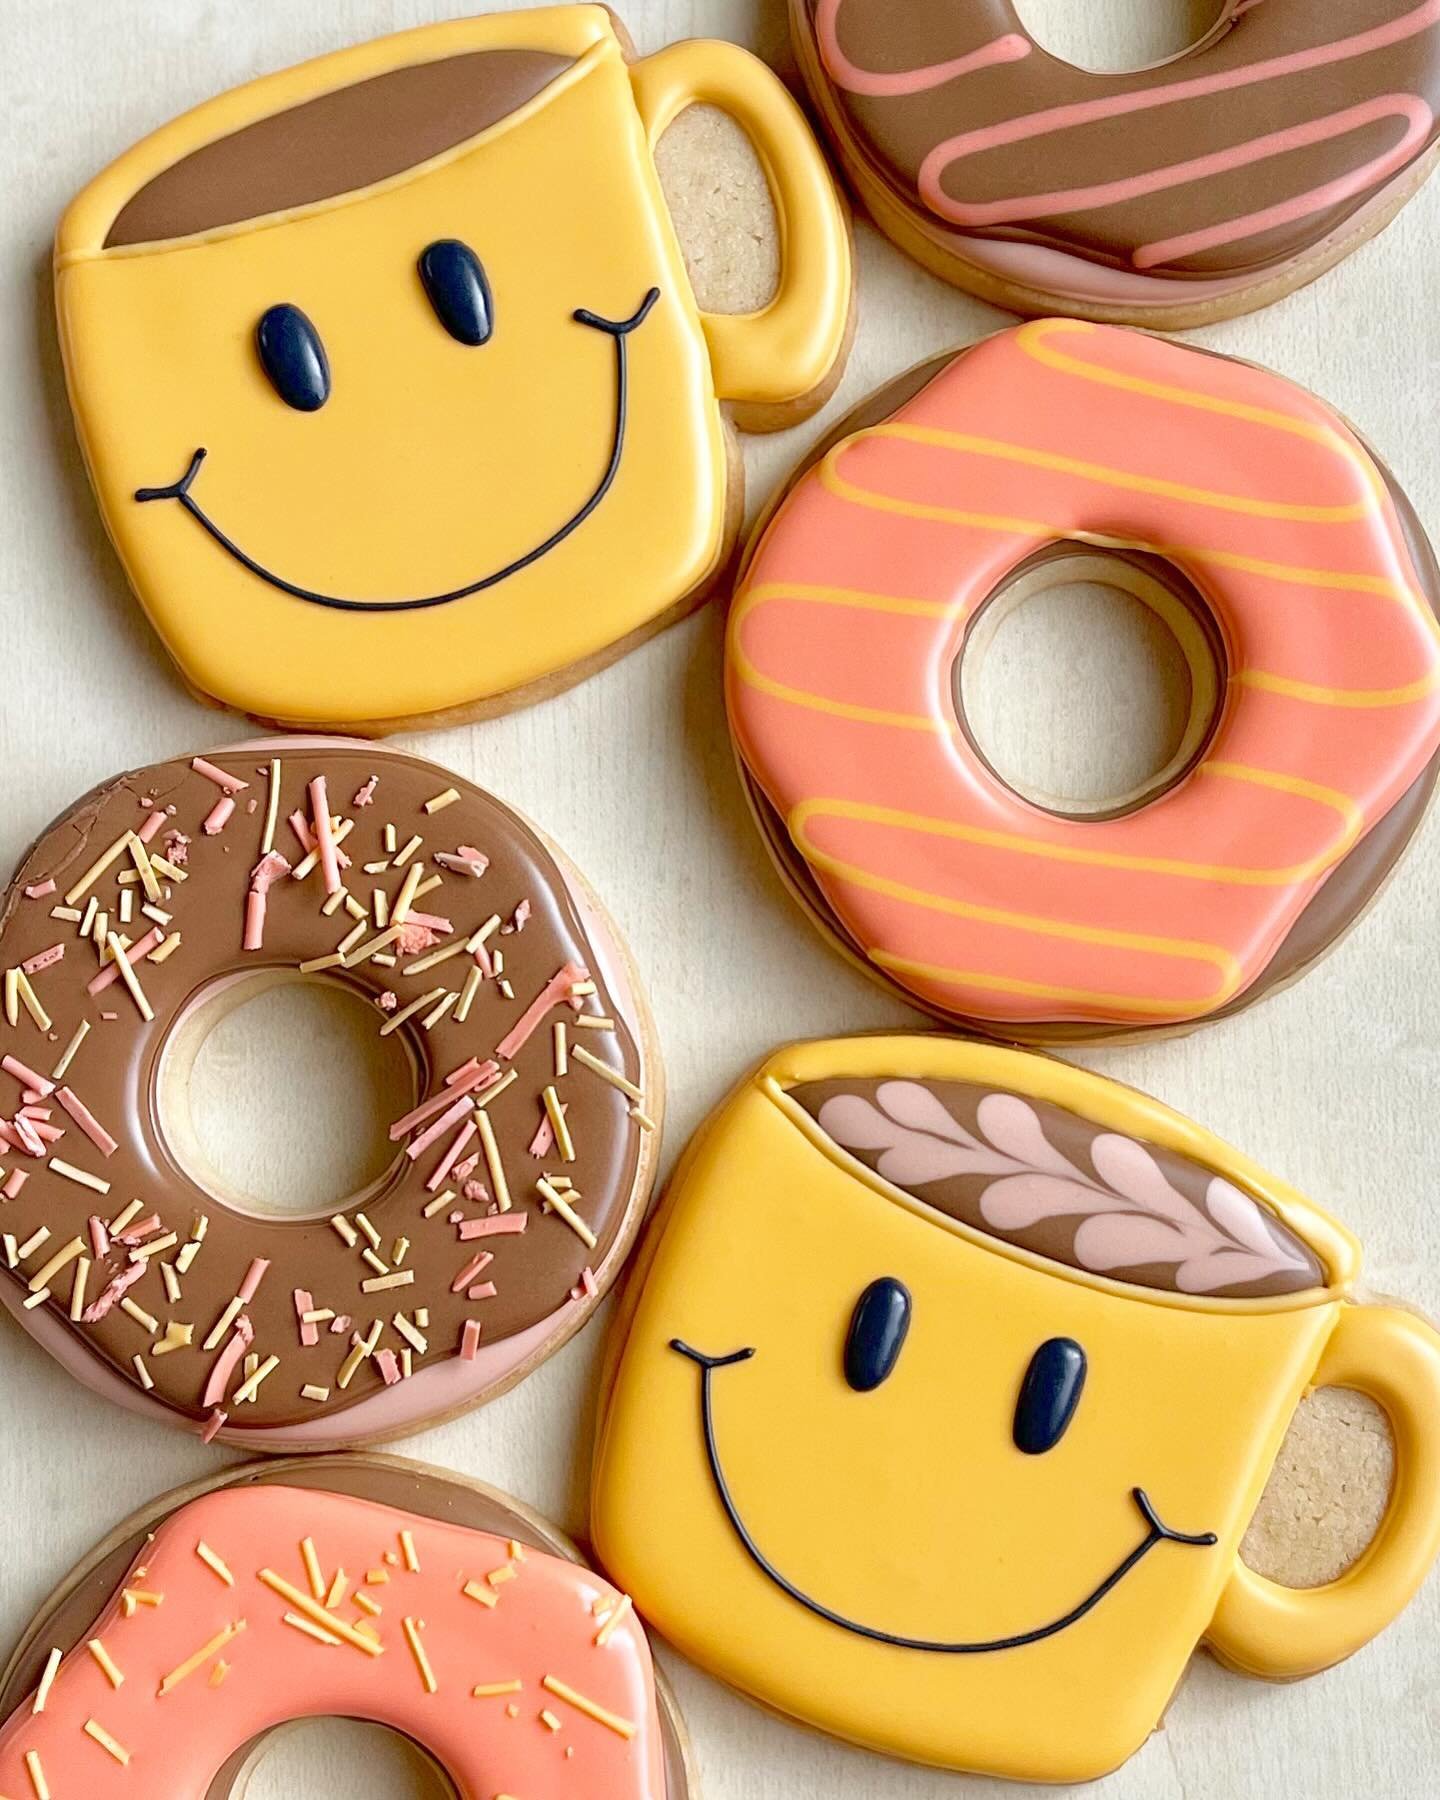 🍩 BEGINNER FRIENDLY COOKIE CLASSES

Decorate cookie donuts &amp; coffee with me on the following dates ⬇️

🗓️ May 25th &amp; June 22
📍 @blackmarketbakery East Village SD 

OR 
 
🗓️ June 7 (National Donut Day!!!)
📍 @shoppigment Del Mar, CA 

This